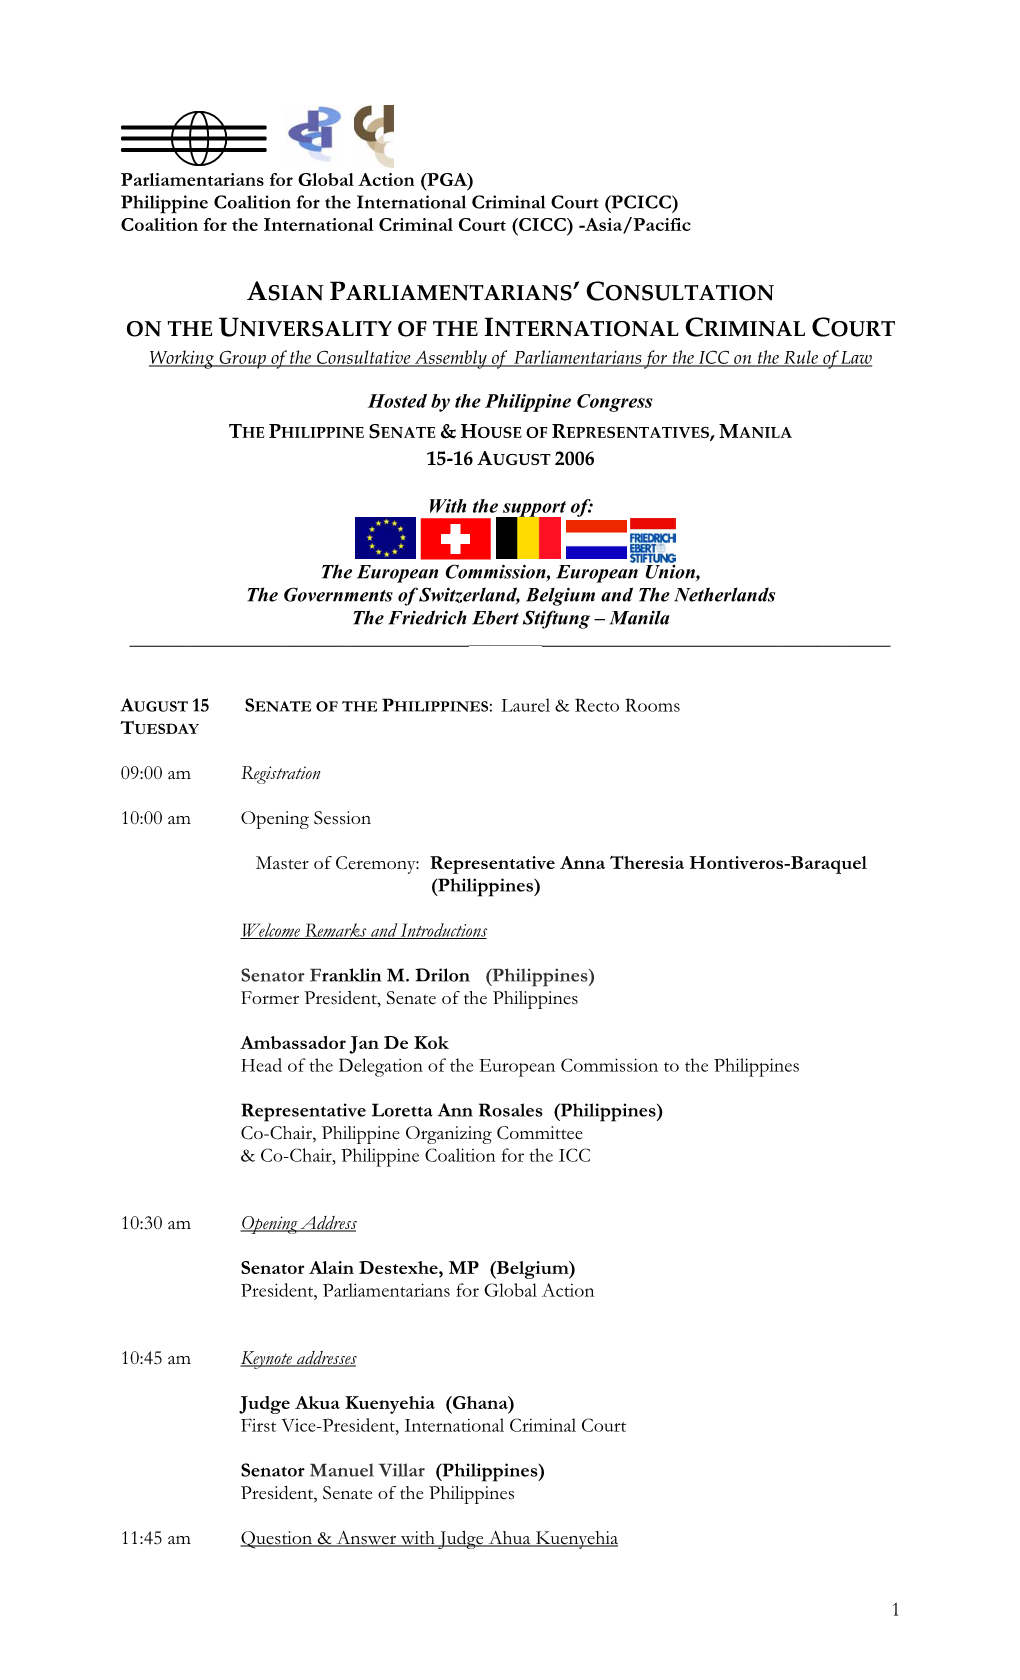 Asian Parliamentarians' Consultation on the Universality of the International Criminal Court